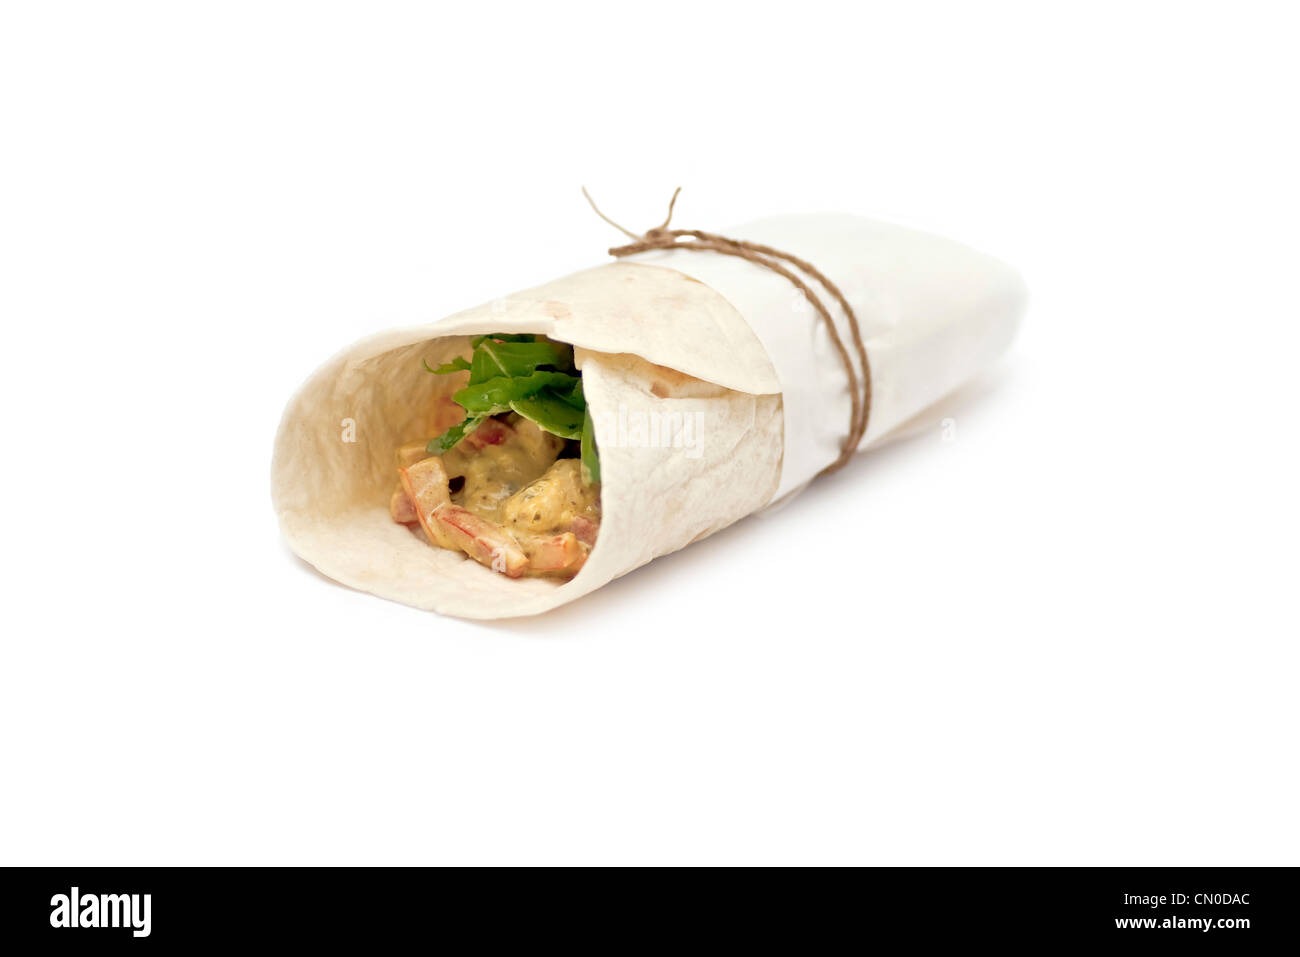 A wrap with meat, salad and tomatoes wrapped in a paper on a white background Stock Photo